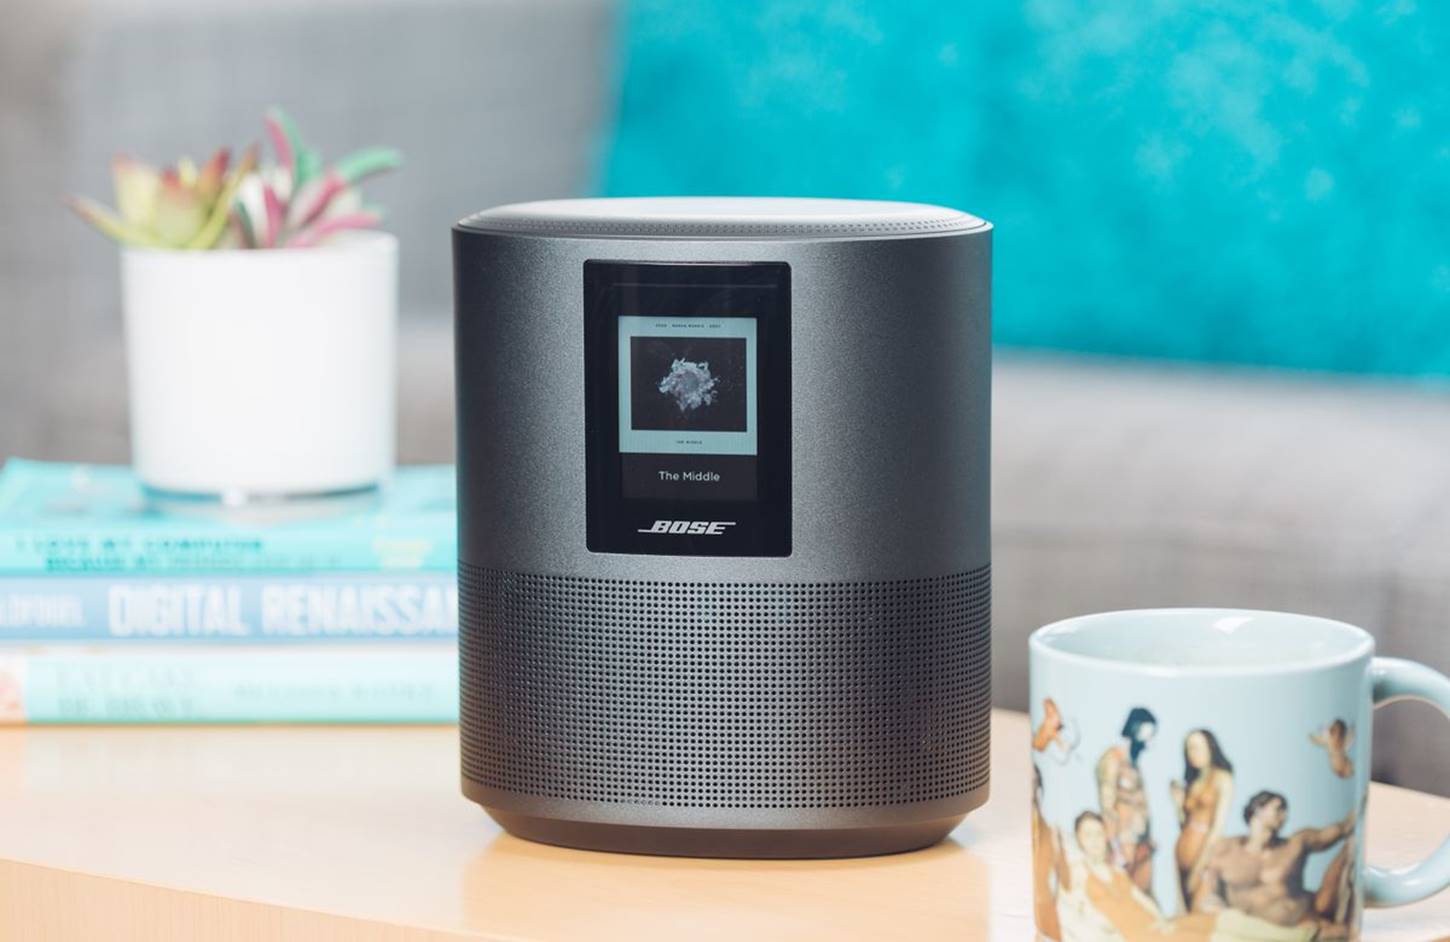 The 10 Best Bose Speakers in 2020 